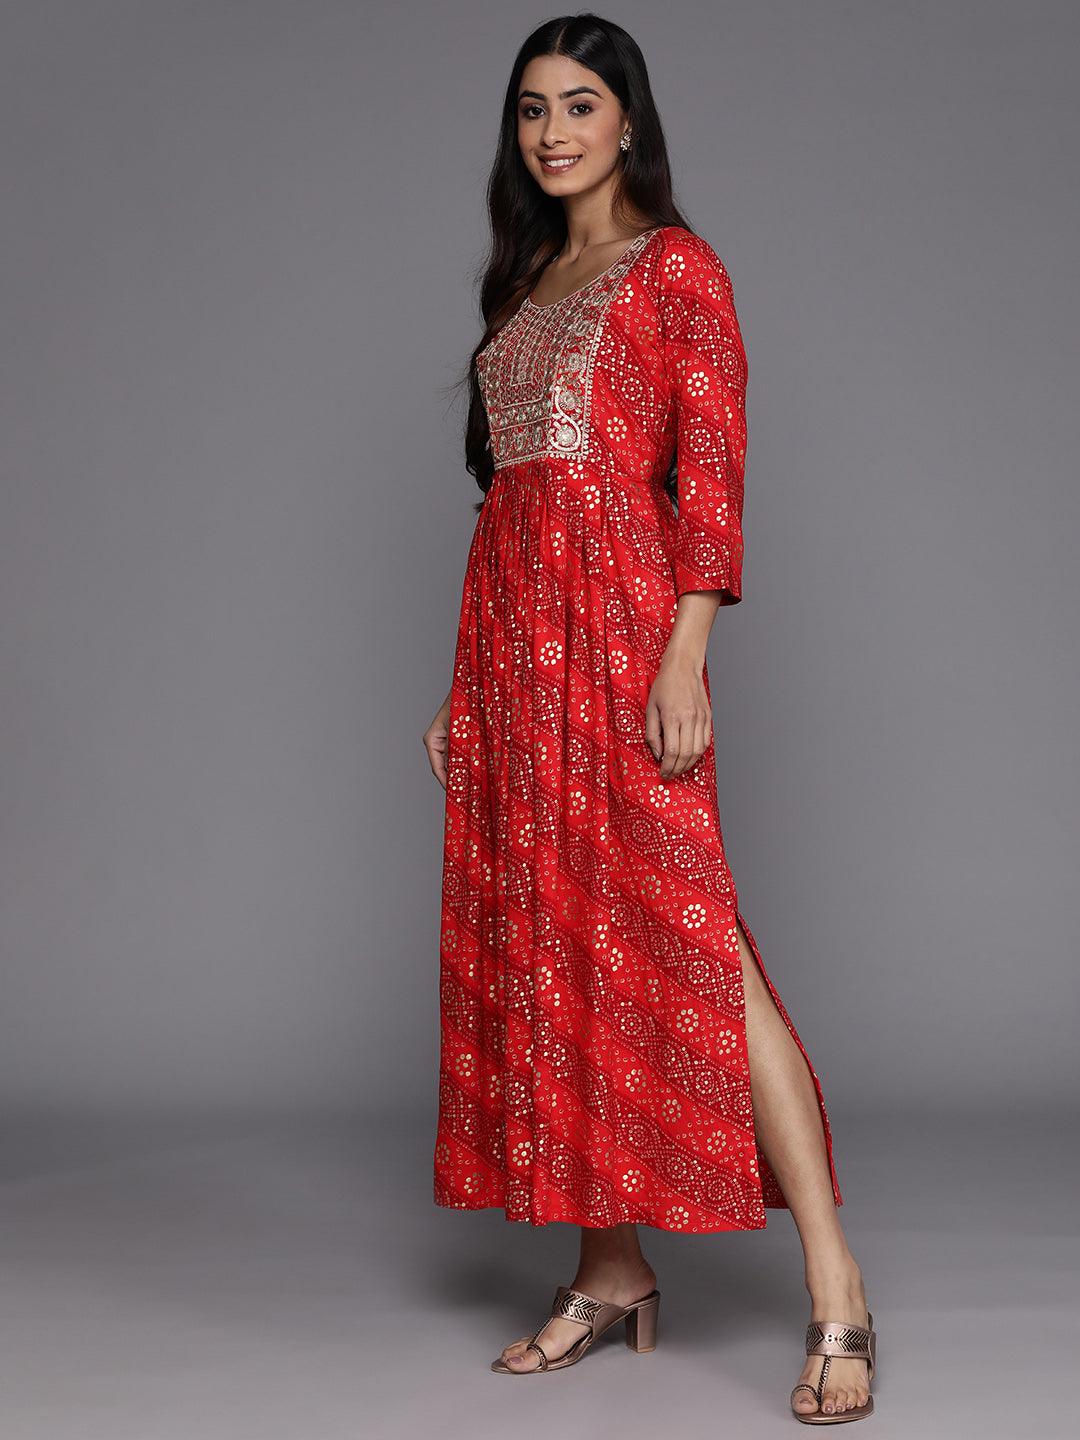 Orange Printed Fit and Flare Rayon Dress - Libas